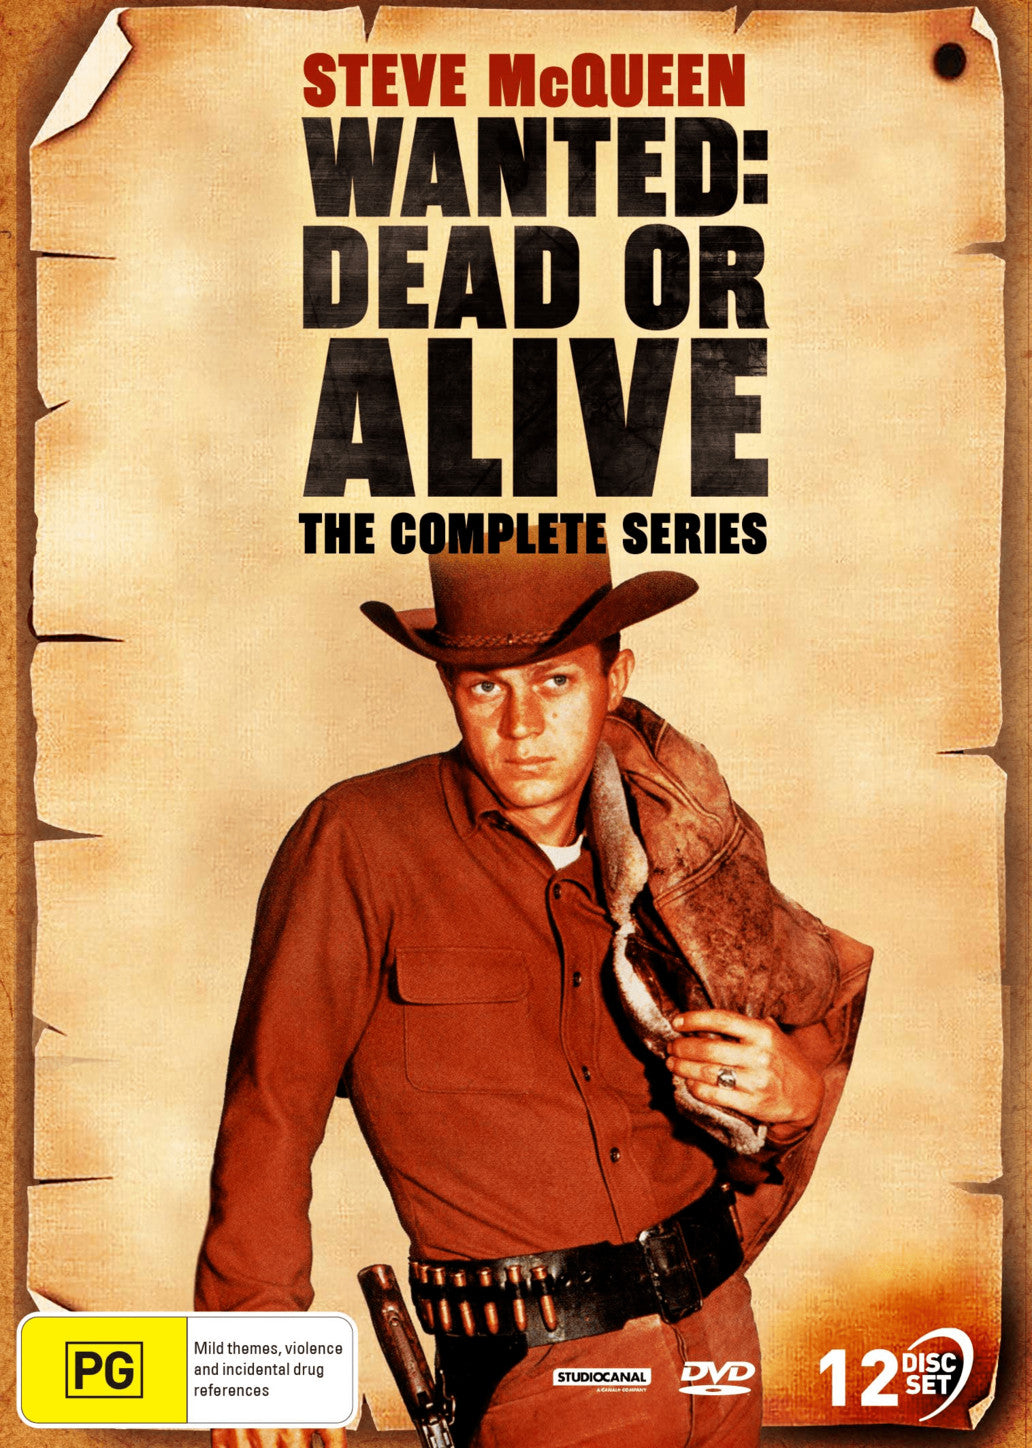 WANTED DEAD OR ALIVE: THE COMPLETE SERIES